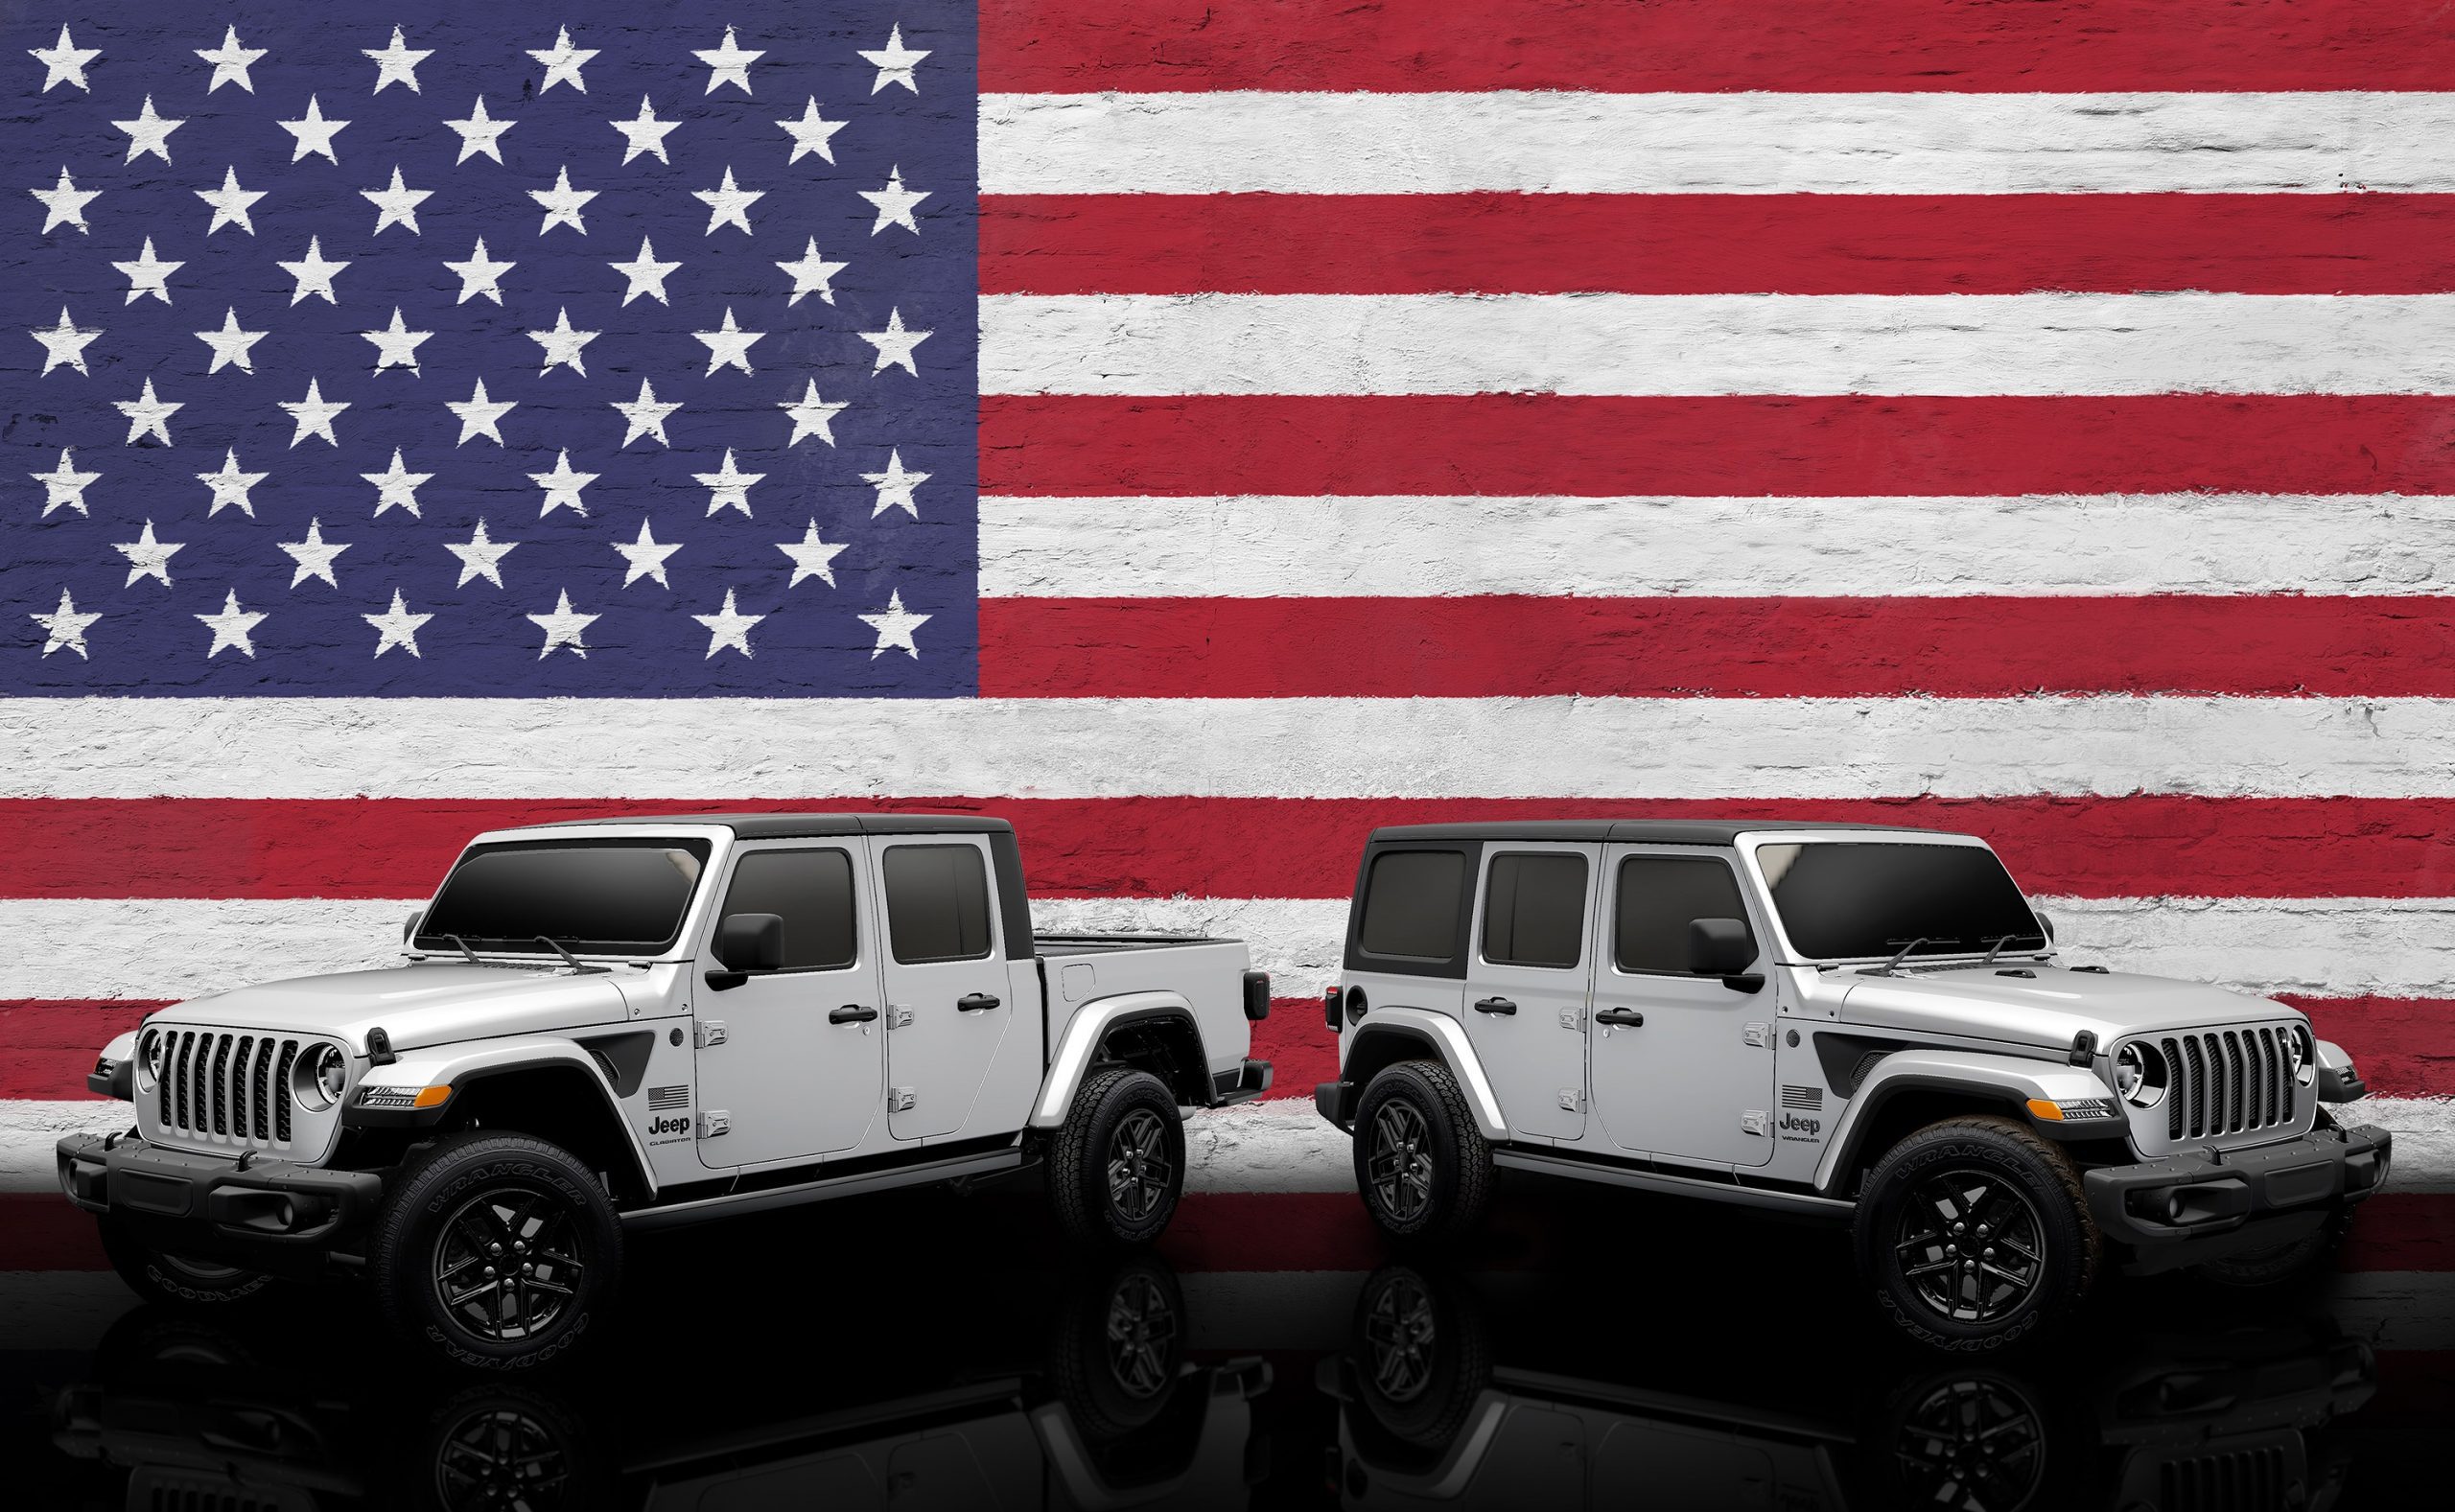 Stellantis's Jeep label has been named America's most patriotic brand by consumers as it looks to celebrate the country's military on July 4.